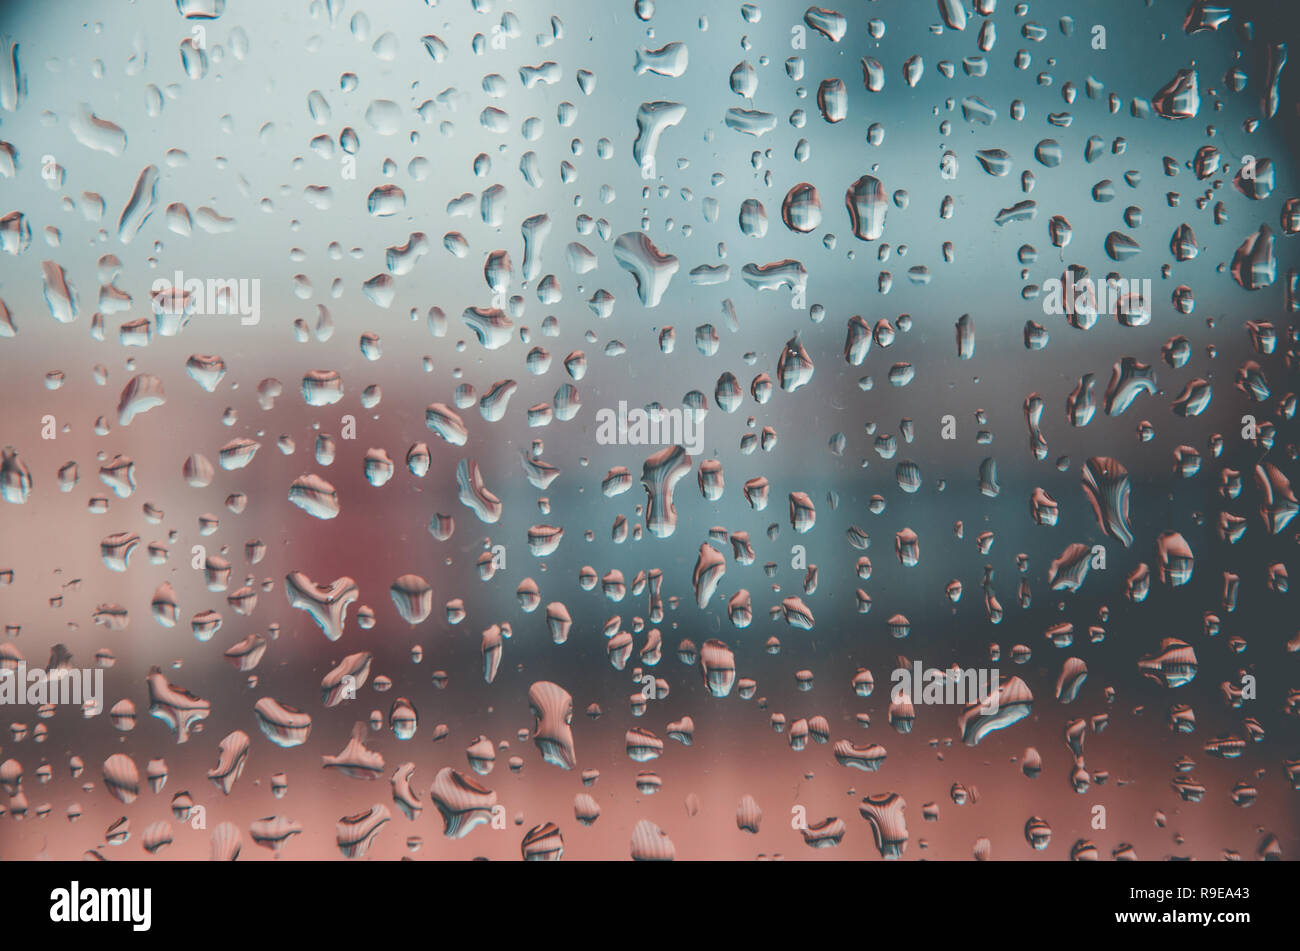 Wallpaper of rain drops or water drops on the glass Vintage